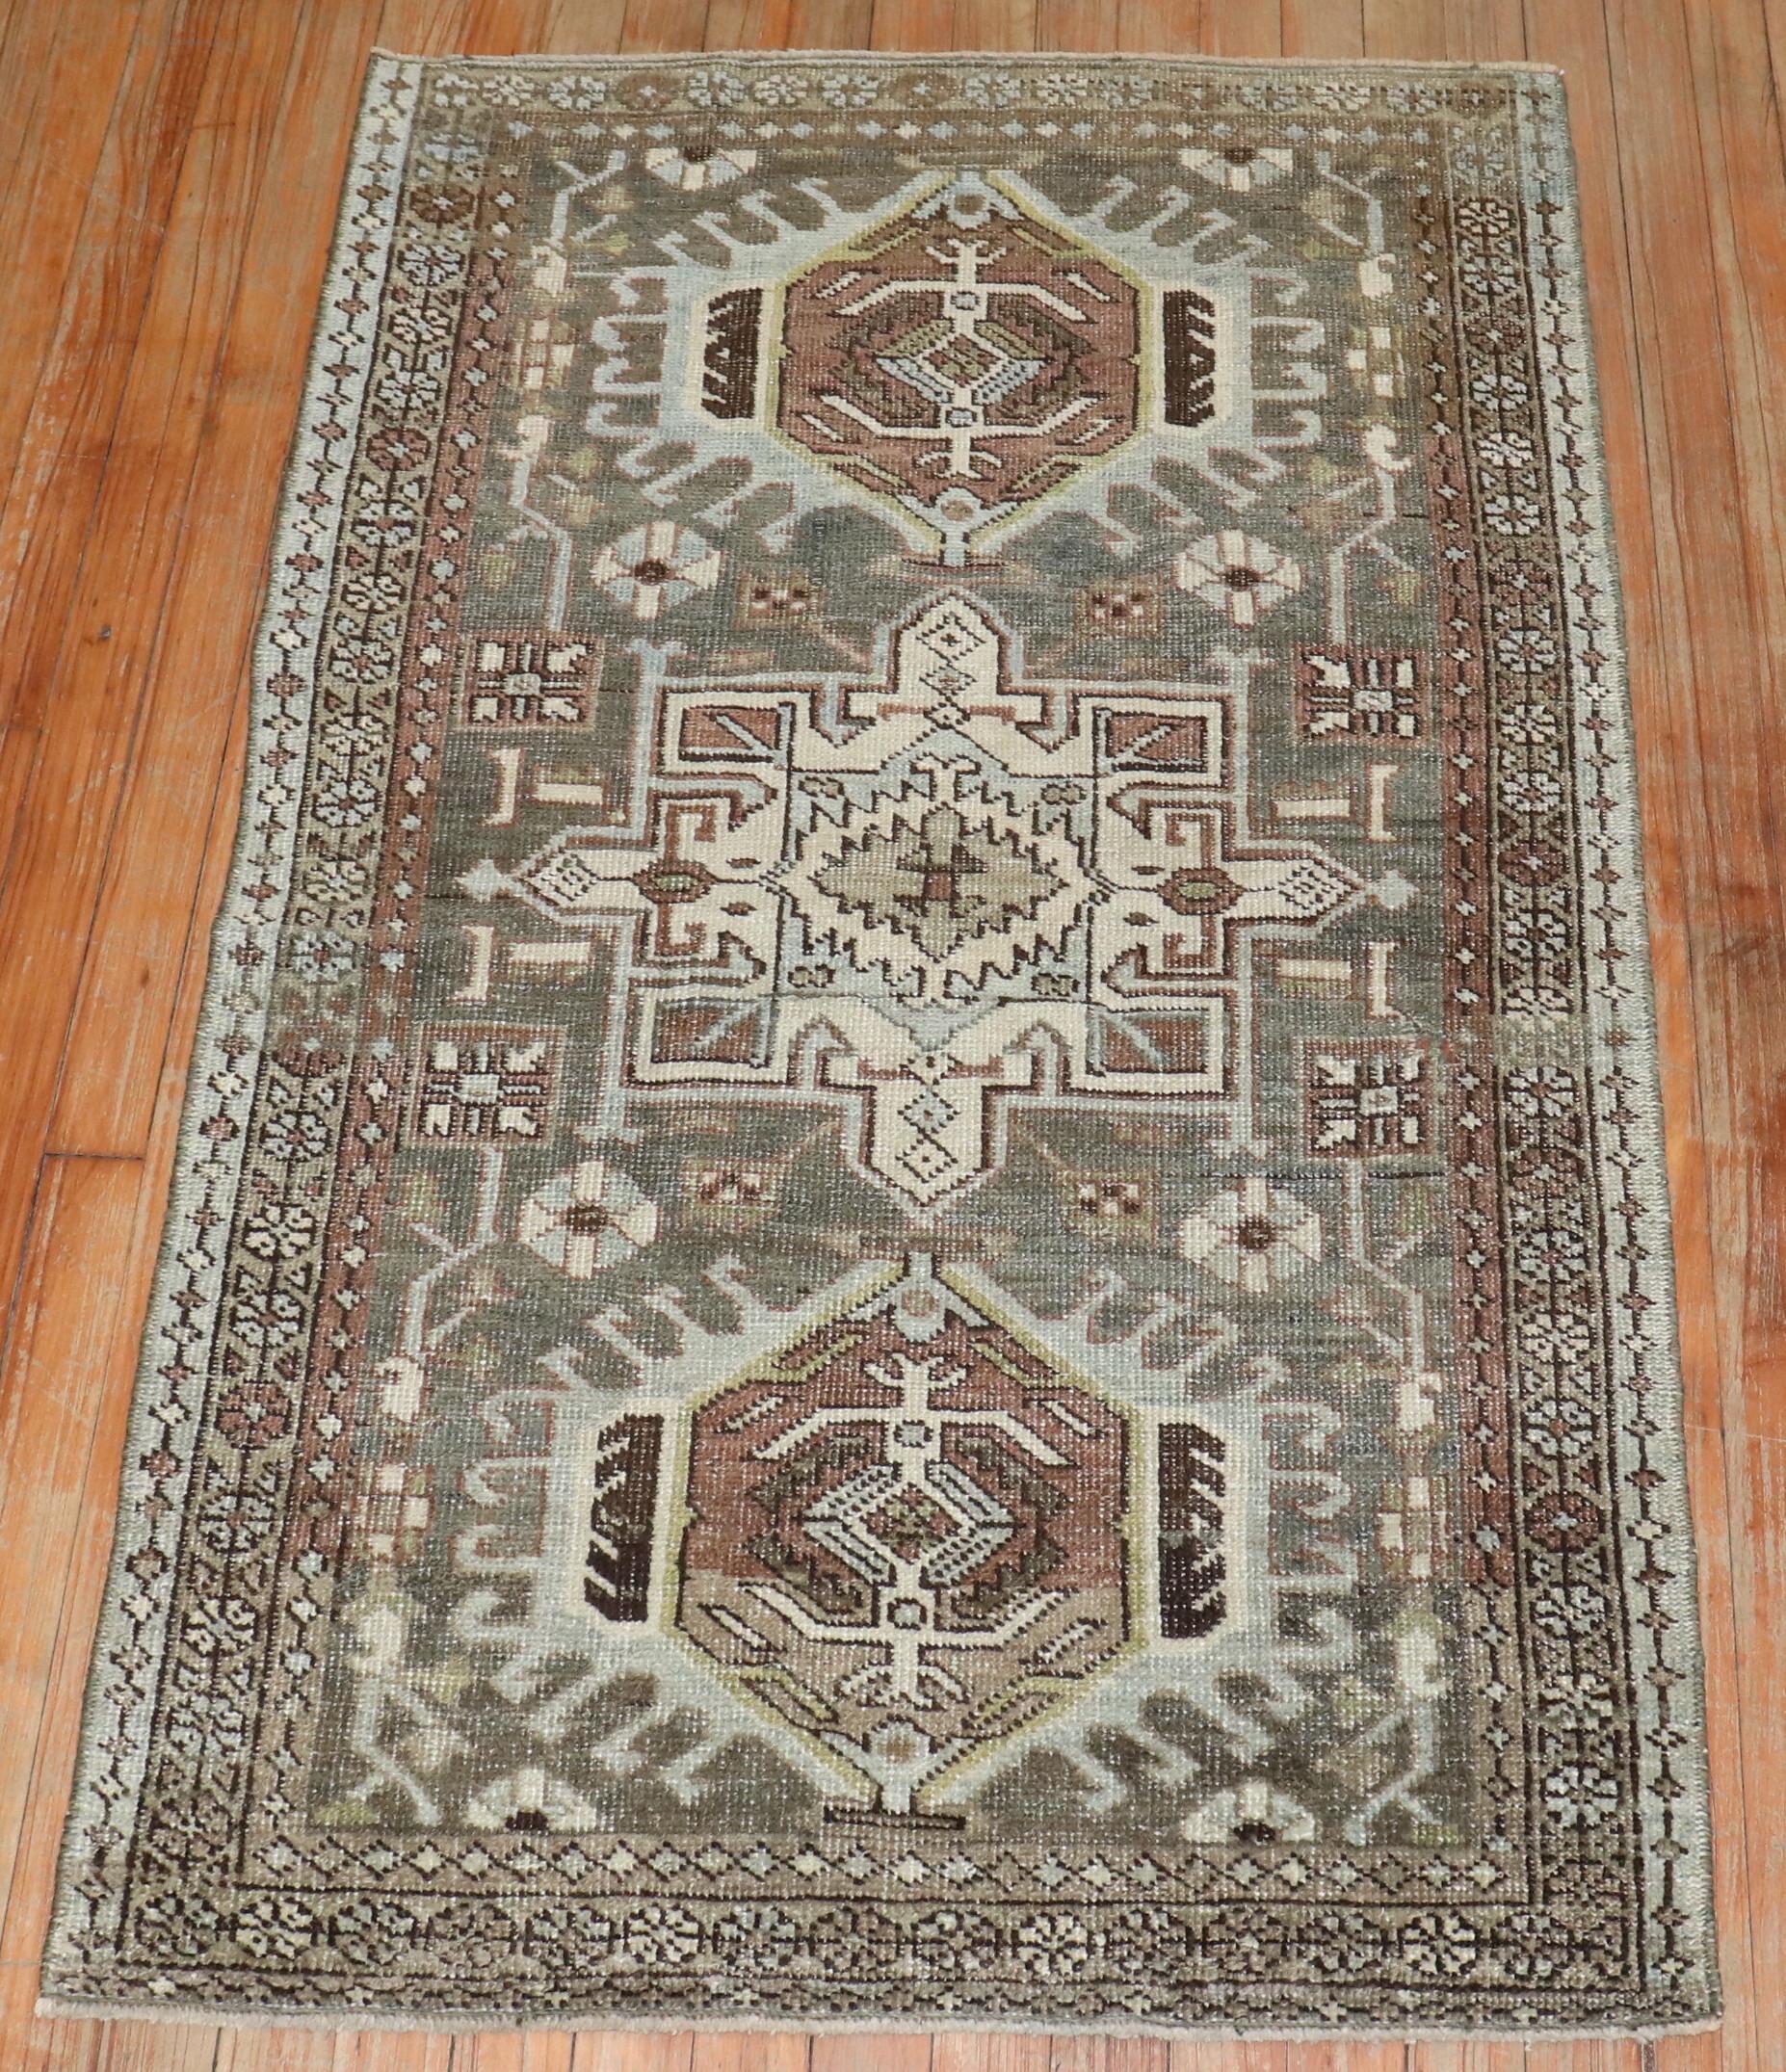 A charcoal color Persian Heriz Rug from the early 20th Century

Measures: 2'9” x 4'4''